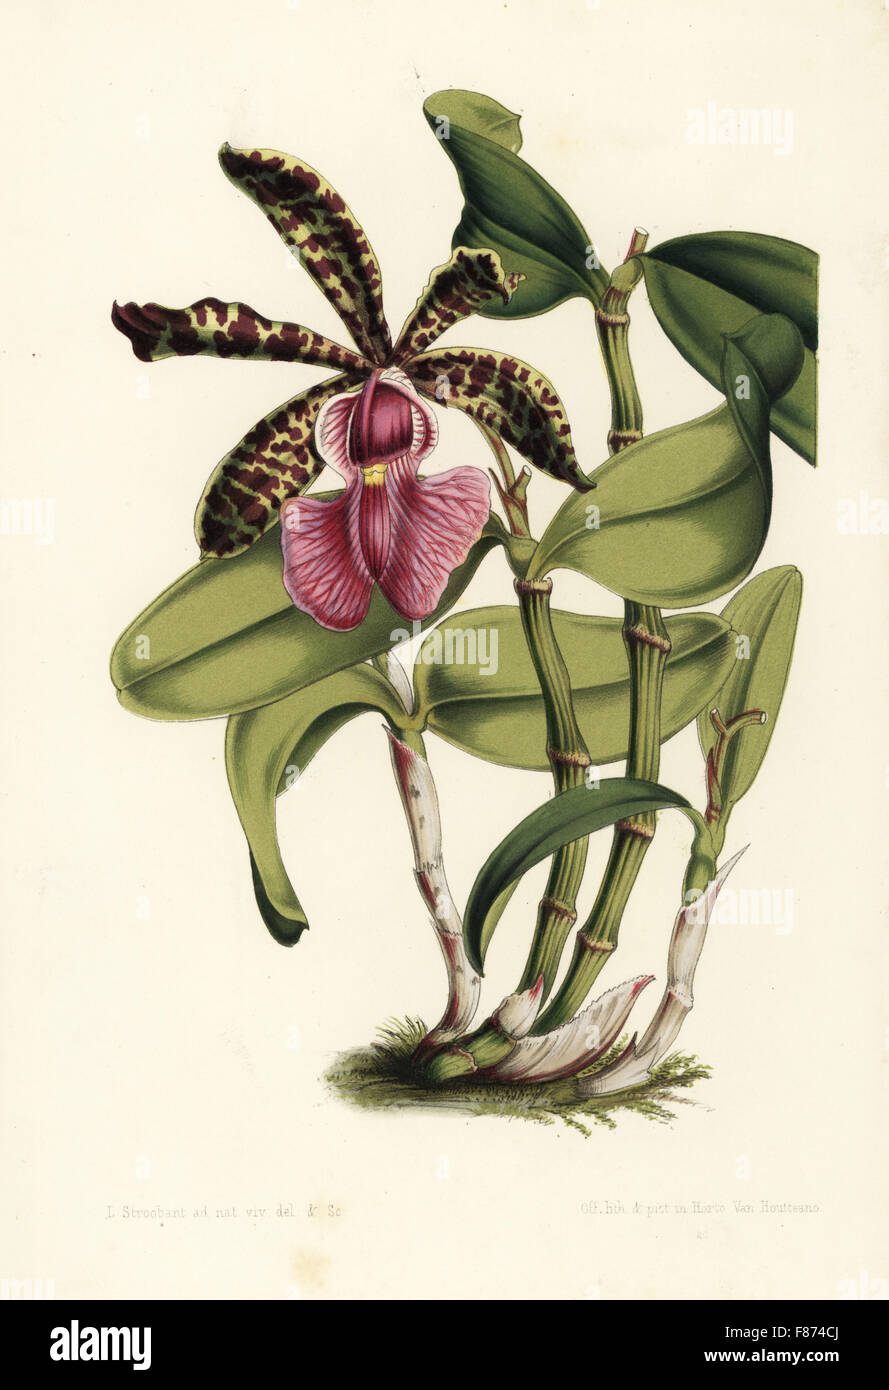 Lady Ackland's cattleya orchid, Cattleya aclandiae (Cattleya acklandiae). Handcoloured lithograph by L. Stroobant from Louis van Houtte and Charles Lemaire's Flowers of the Gardens and Hothouses of Europe, Flore des Serres et des Jardins de l'Europe, Ghent, Belgium, 1851. Stock Photo